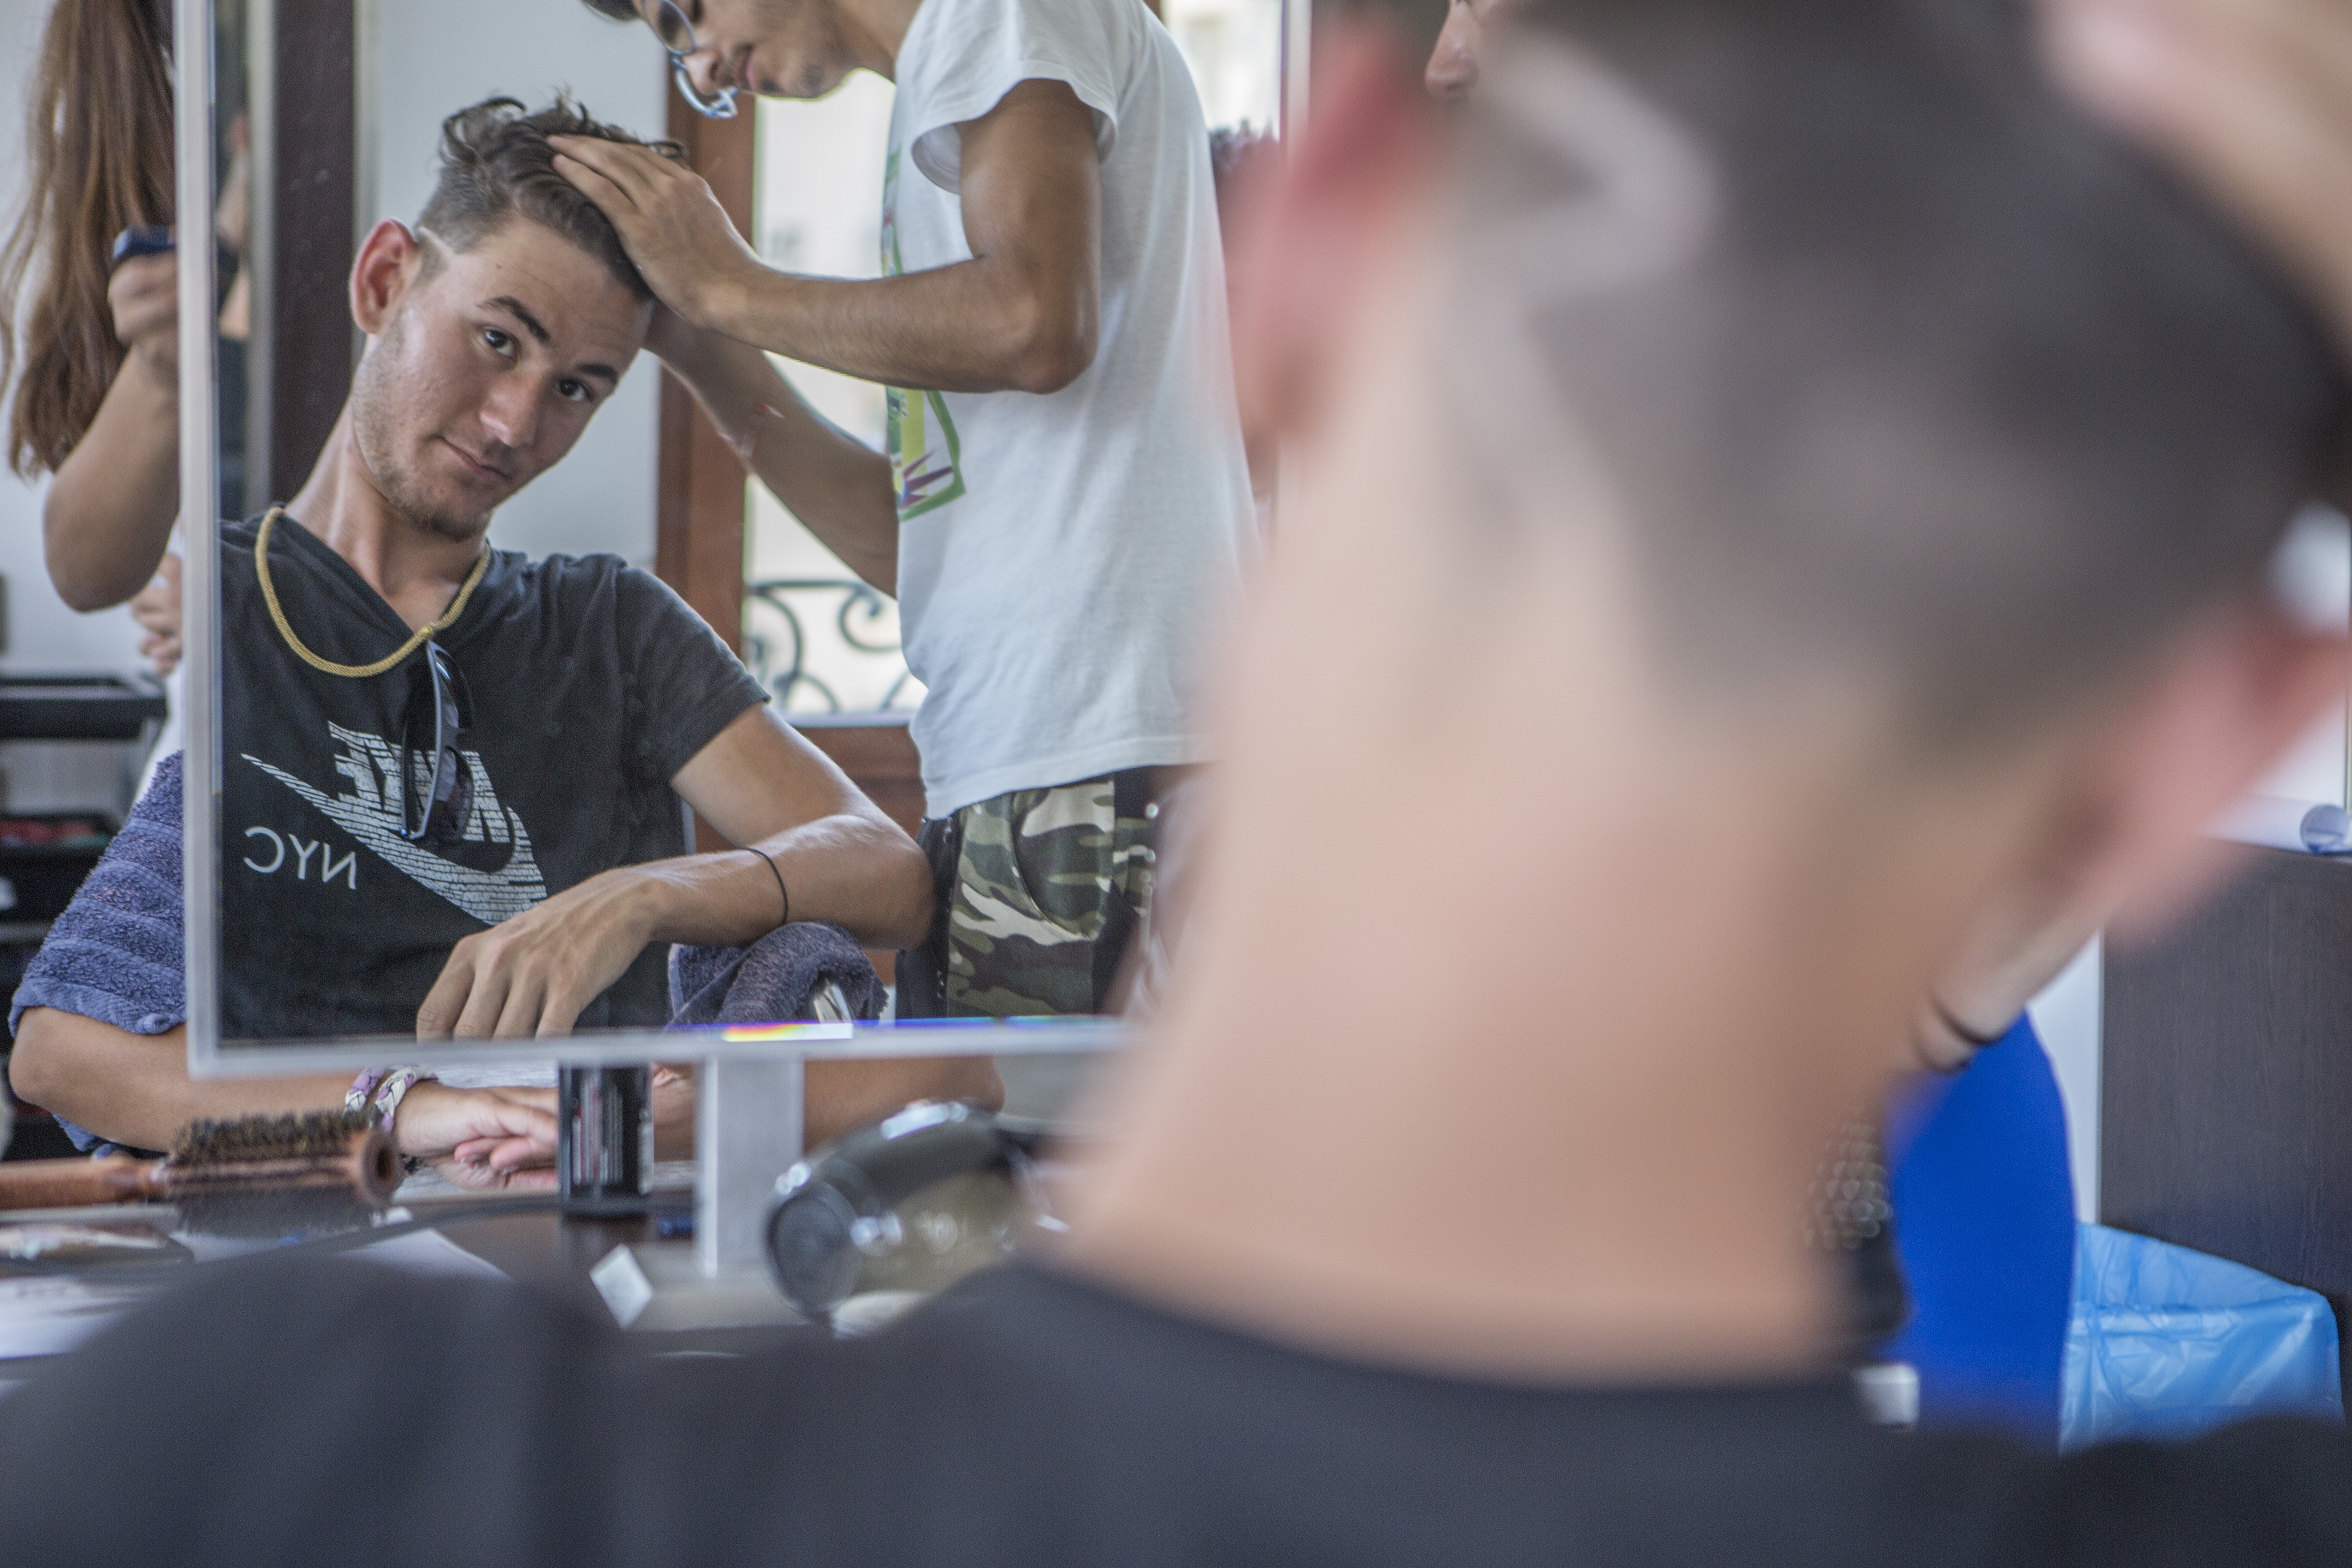 A man sits in a barber chair, looking into a mirror, while having his head shaved.